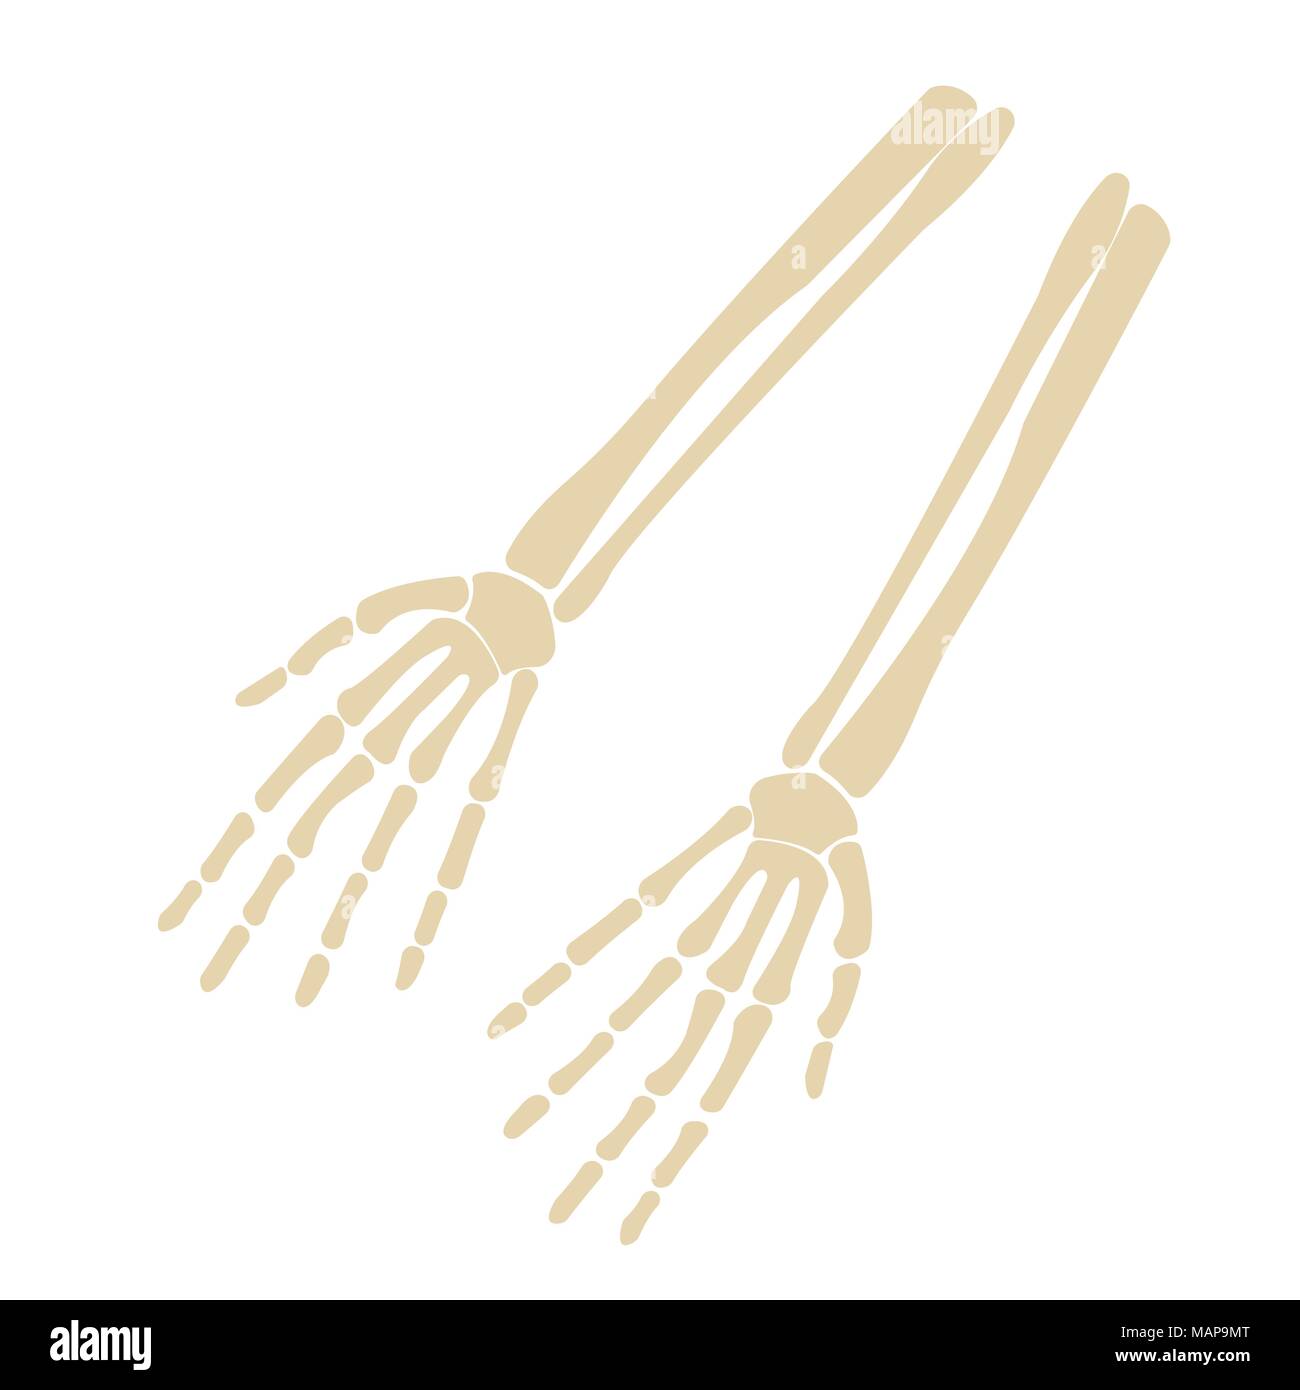 Human Skeleton Hand front side Silhouette. Isolated on White Background. Icon Vector illustration. Stock Vector